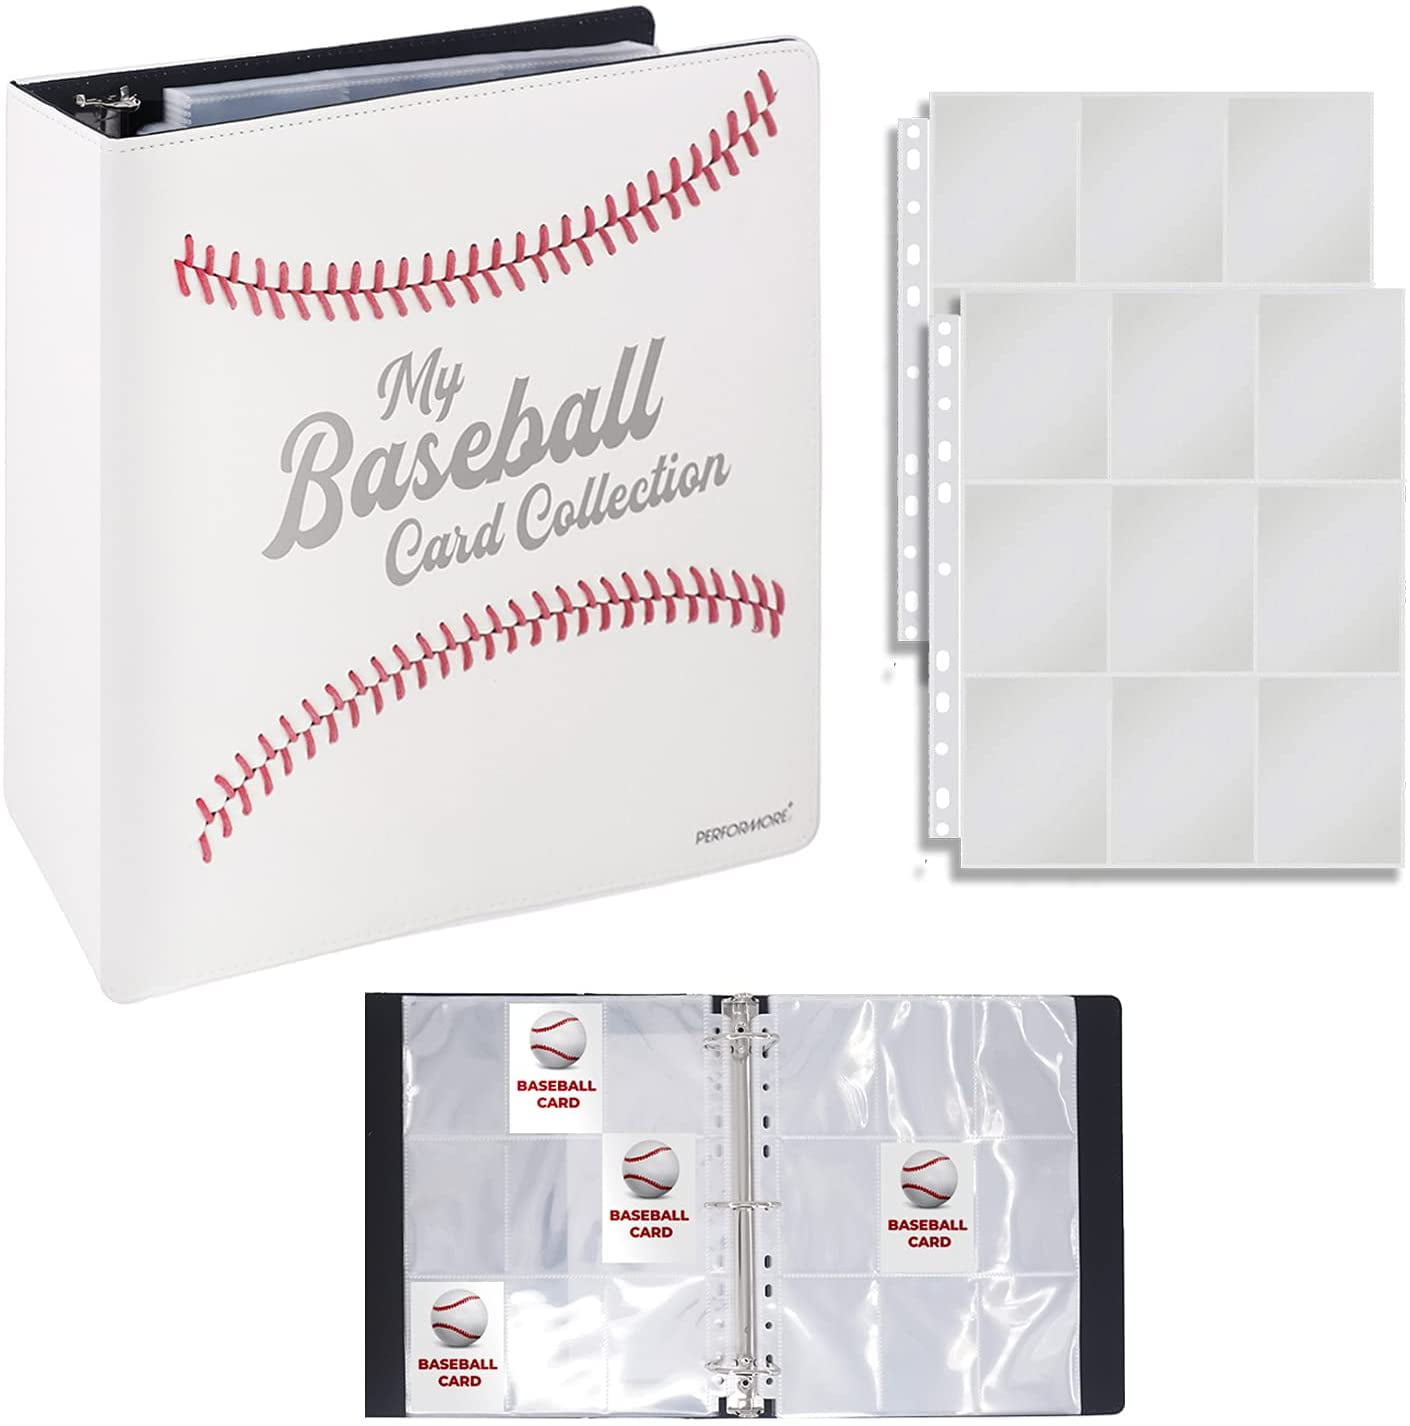 ULTRA PRO 9 Pocket Pages for Binder BASEBALL Cards or COUPON Sleeves 200 *NEW* 